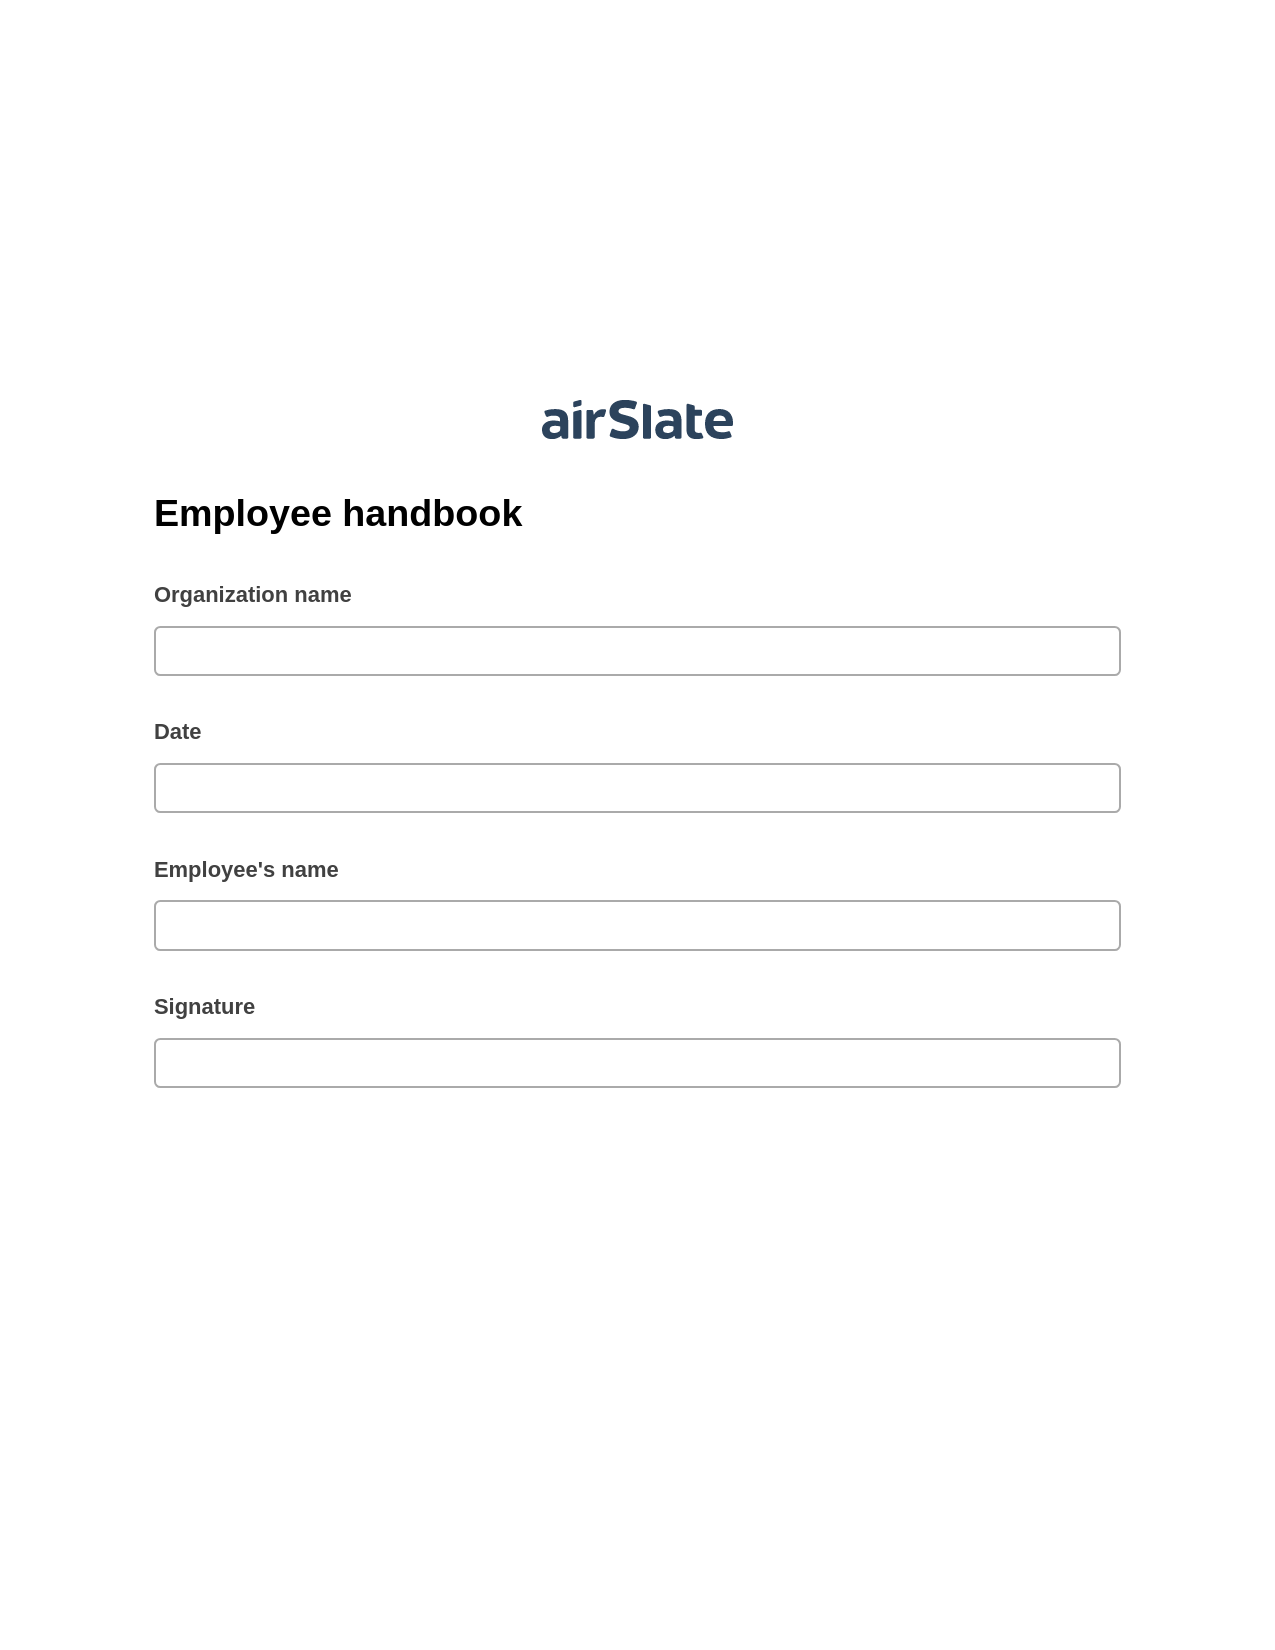 Employee handbook Pre-fill Dropdowns from CSV File Bot, Create MS Dynamics 365 Records Bot, Export to NetSuite Record Bot